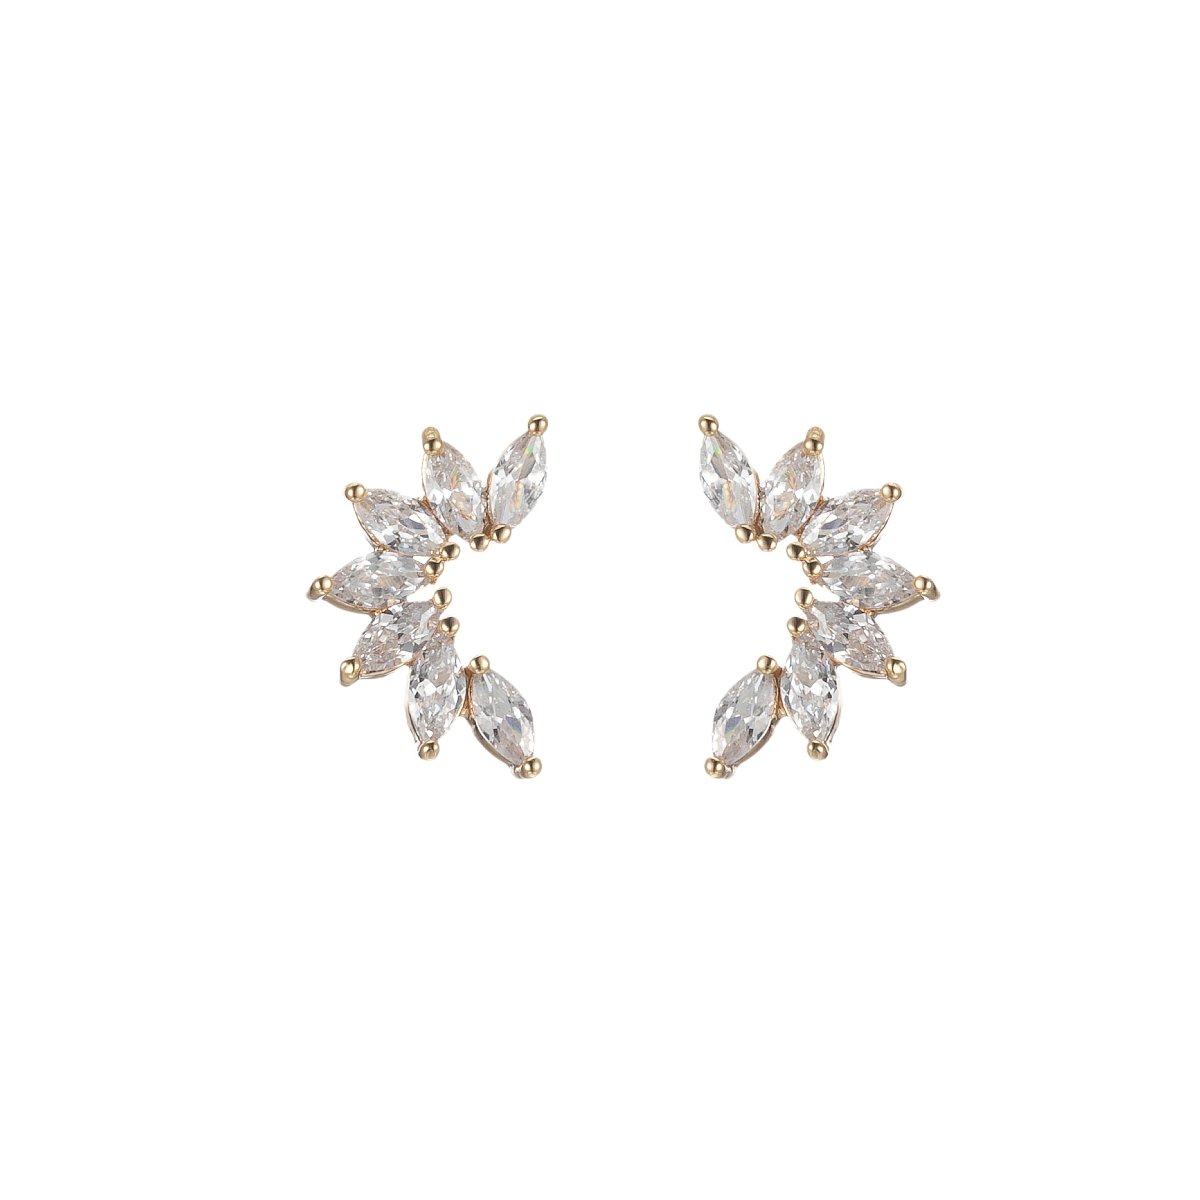 Crystal Sparky Leaves Studs Earring CZ Stone Floral Nature Blooming Crystal Leaves Earring Jewelry P-200 - DLUXCA